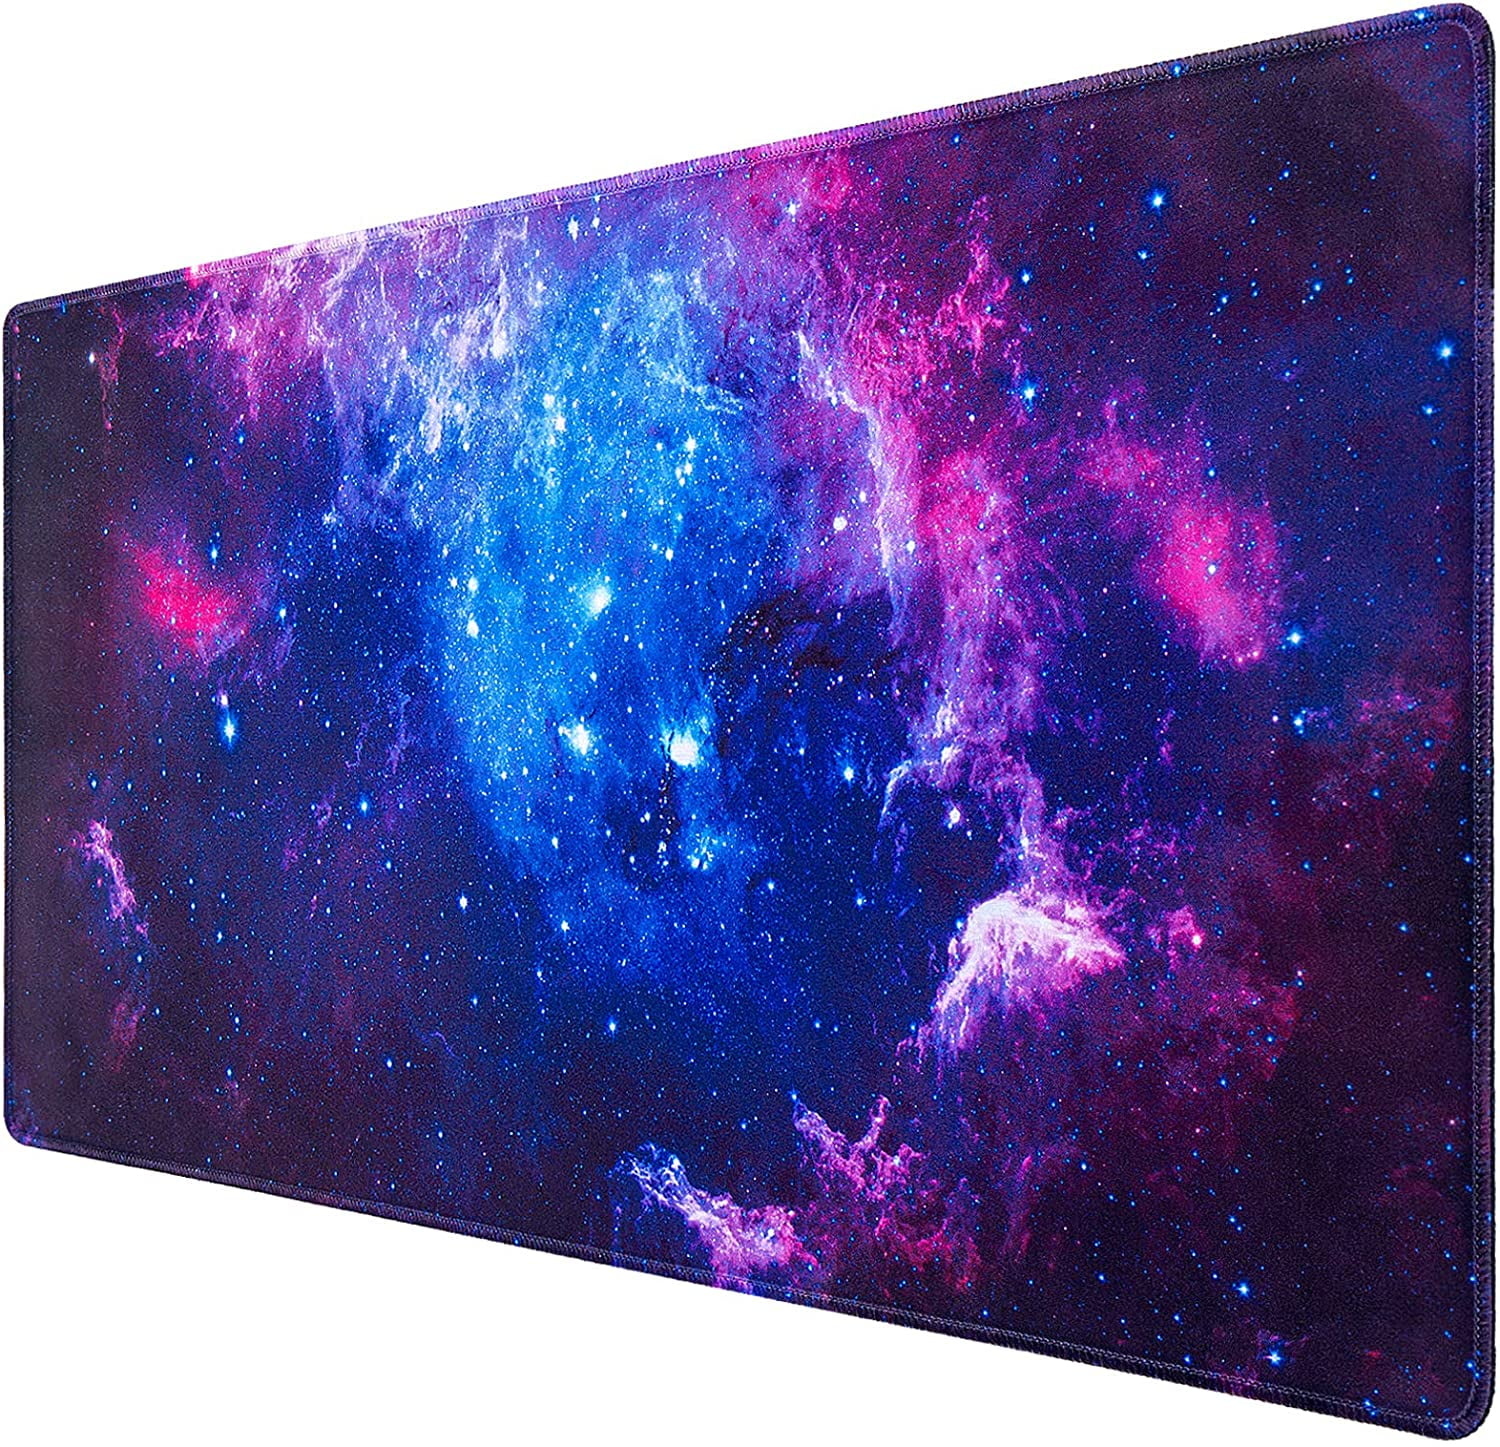 Cushion Home Office Computer Desk Keyboard Mice Mat Galaxy Mouse Pad Game 